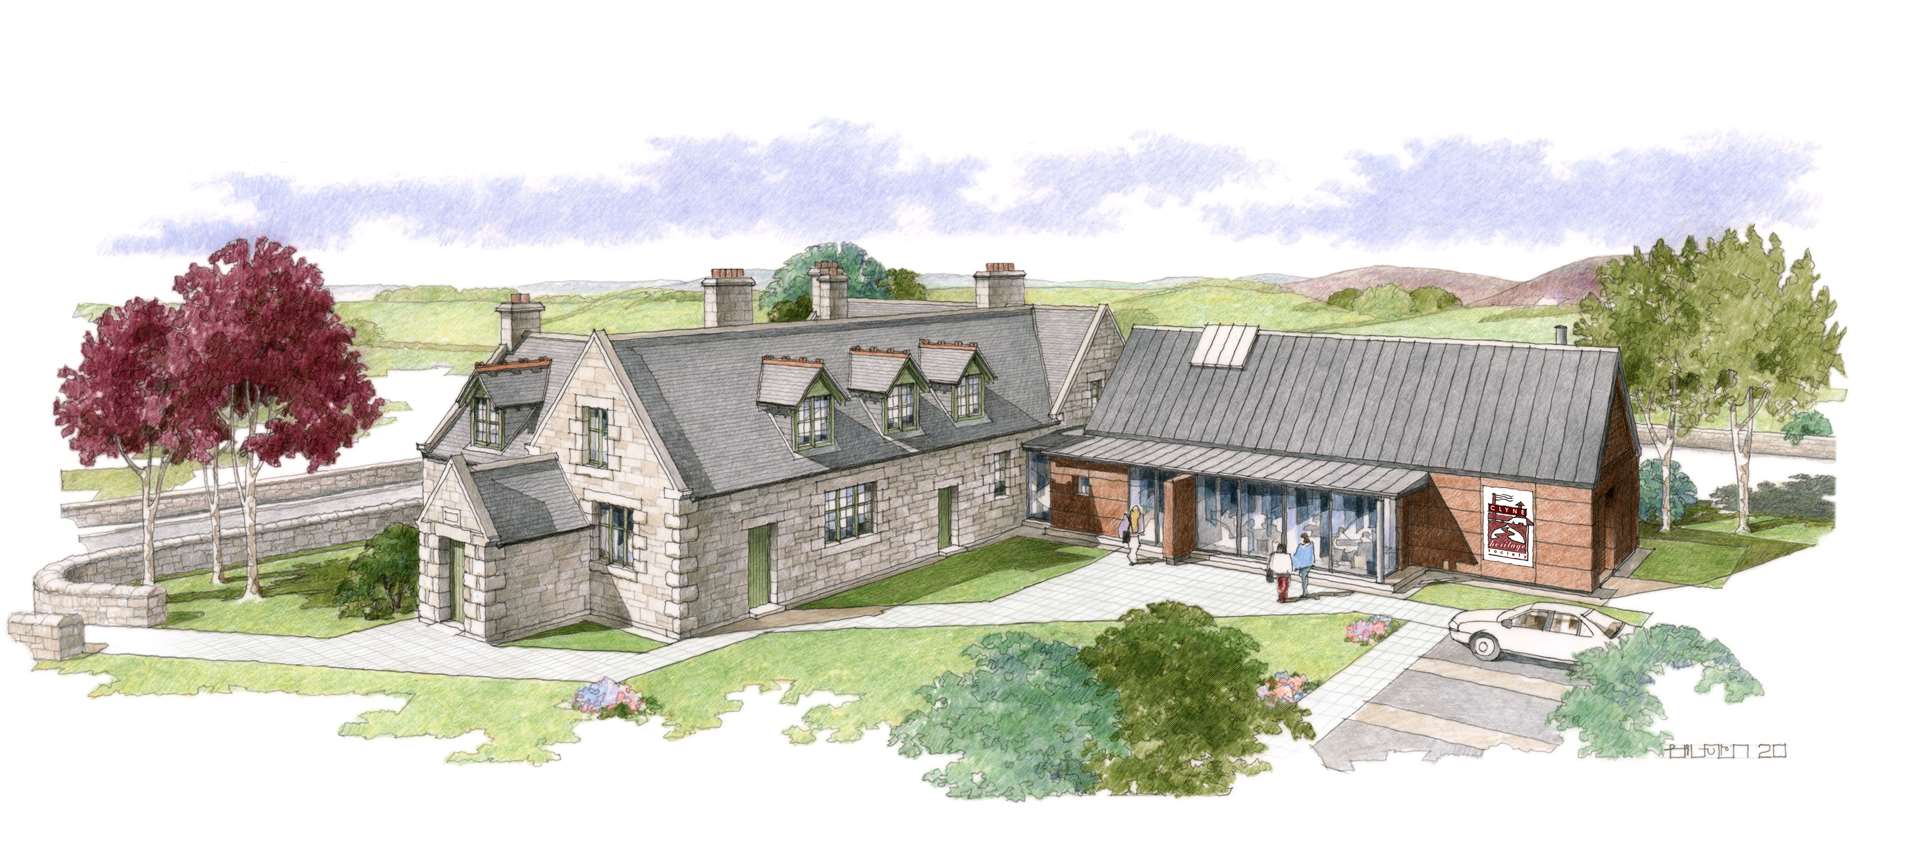 An artist’s impression of how the community heritage centre and museum will look.